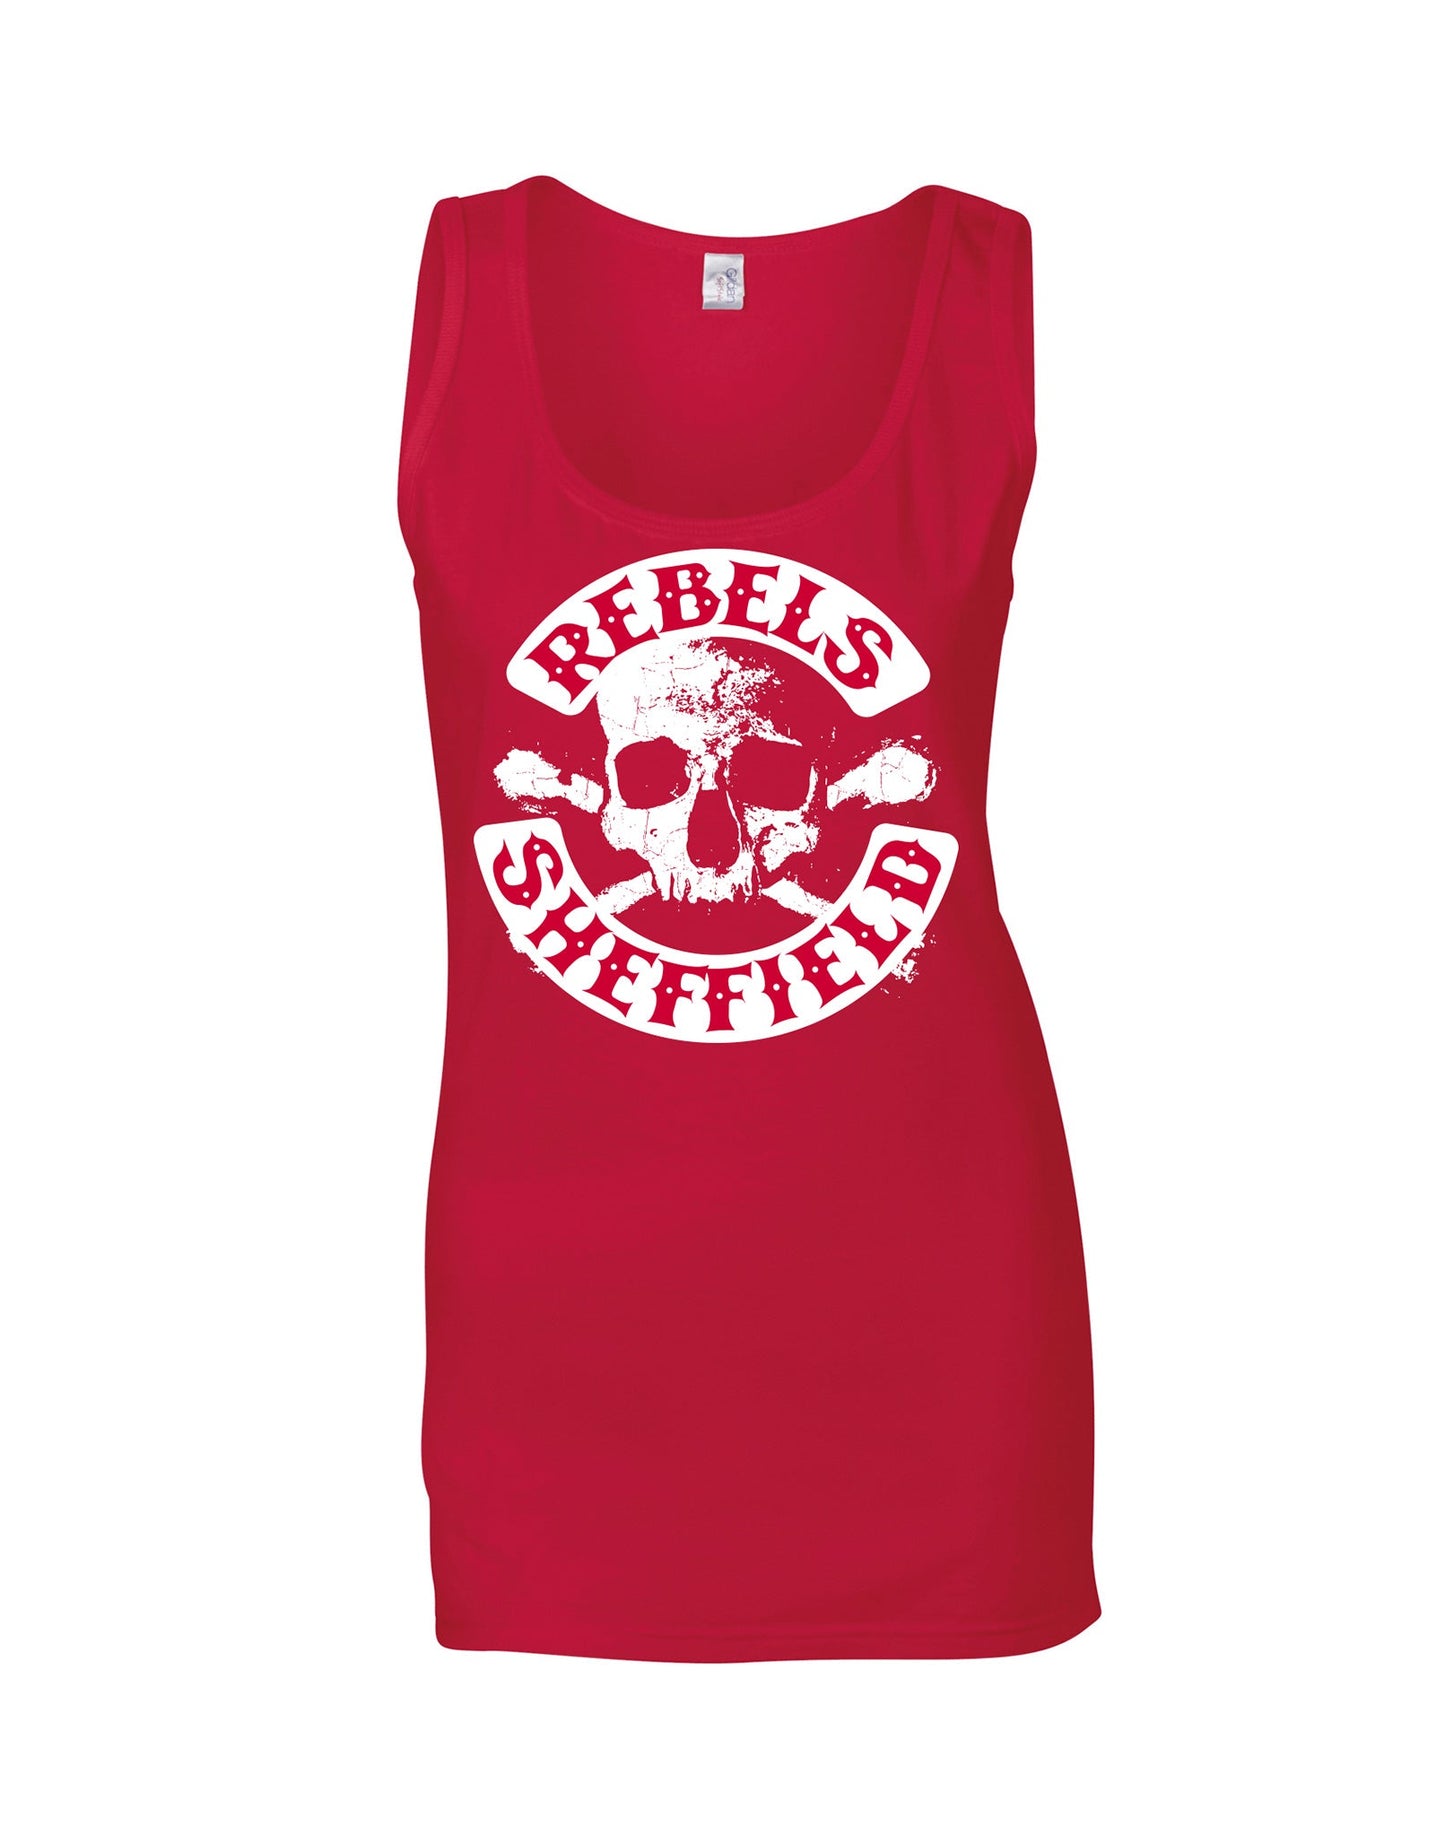 Rebels Skull ladies fit vest - various colours - Dirty Stop Outs